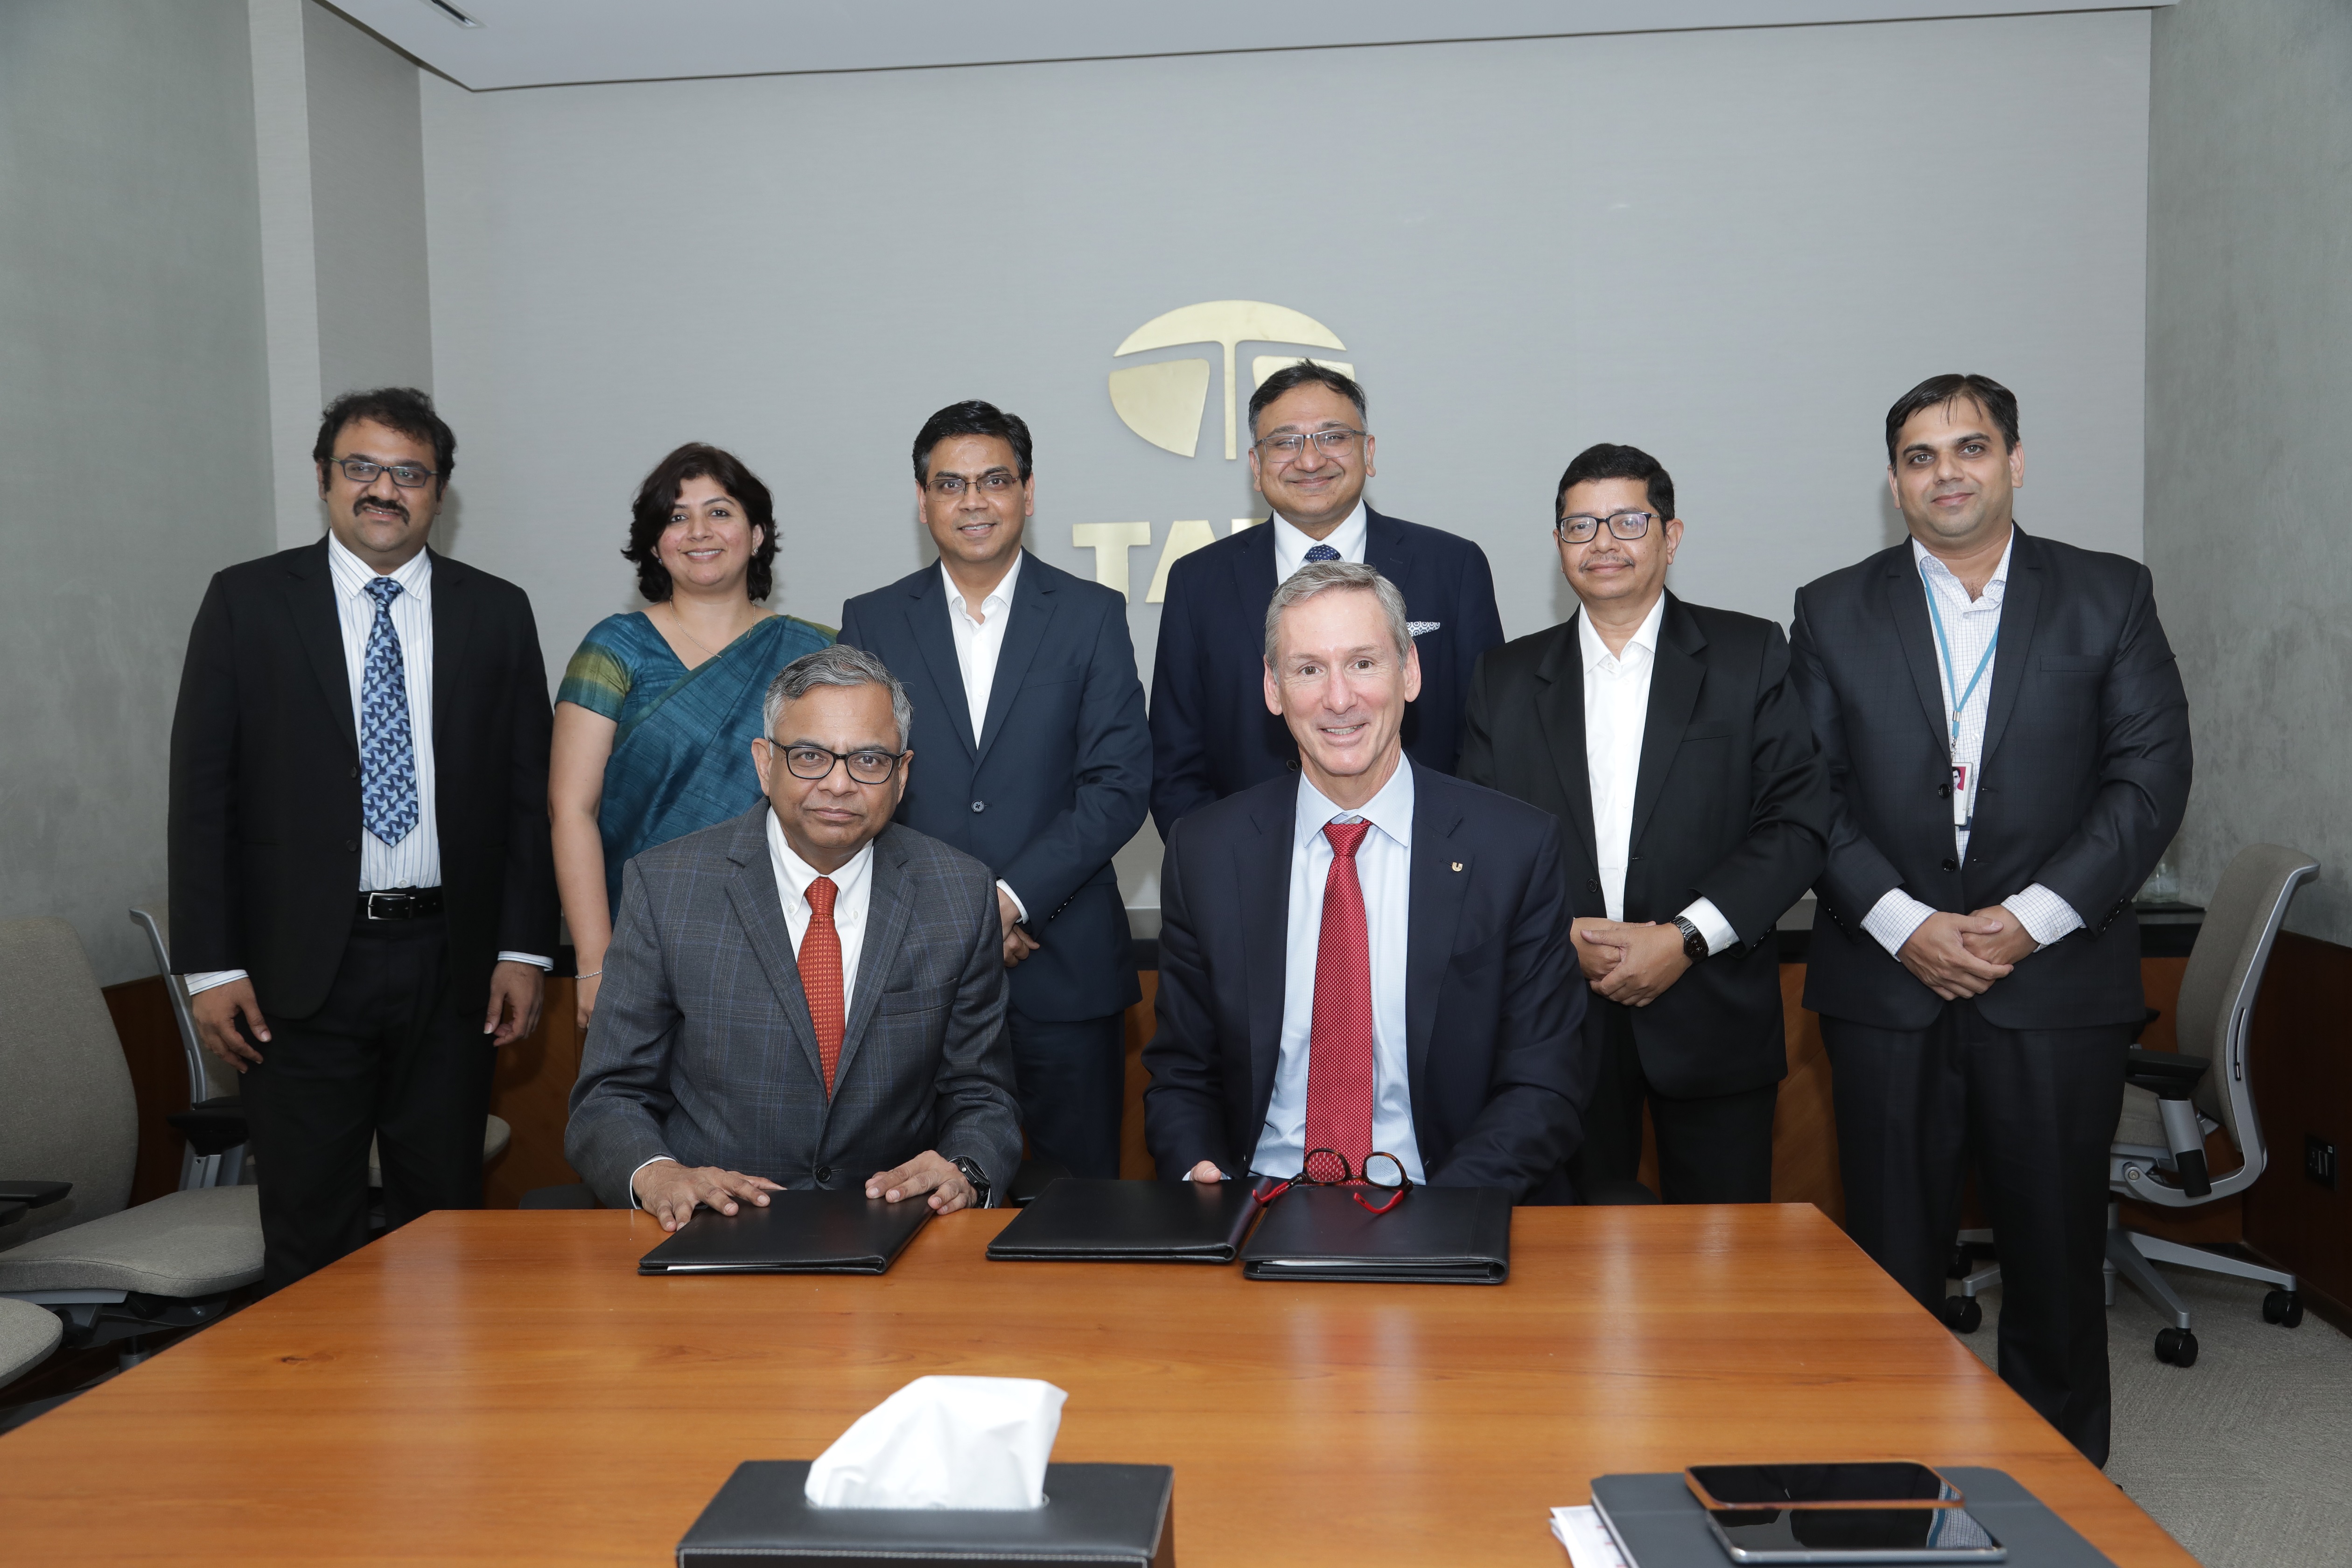 Cummins Inc. and Tata Motors sign a Memorandum of Understanding to accelerate India’s journey towards ‘Net Zero’ emissions with Hydrogen powered commercial vehicle solutions